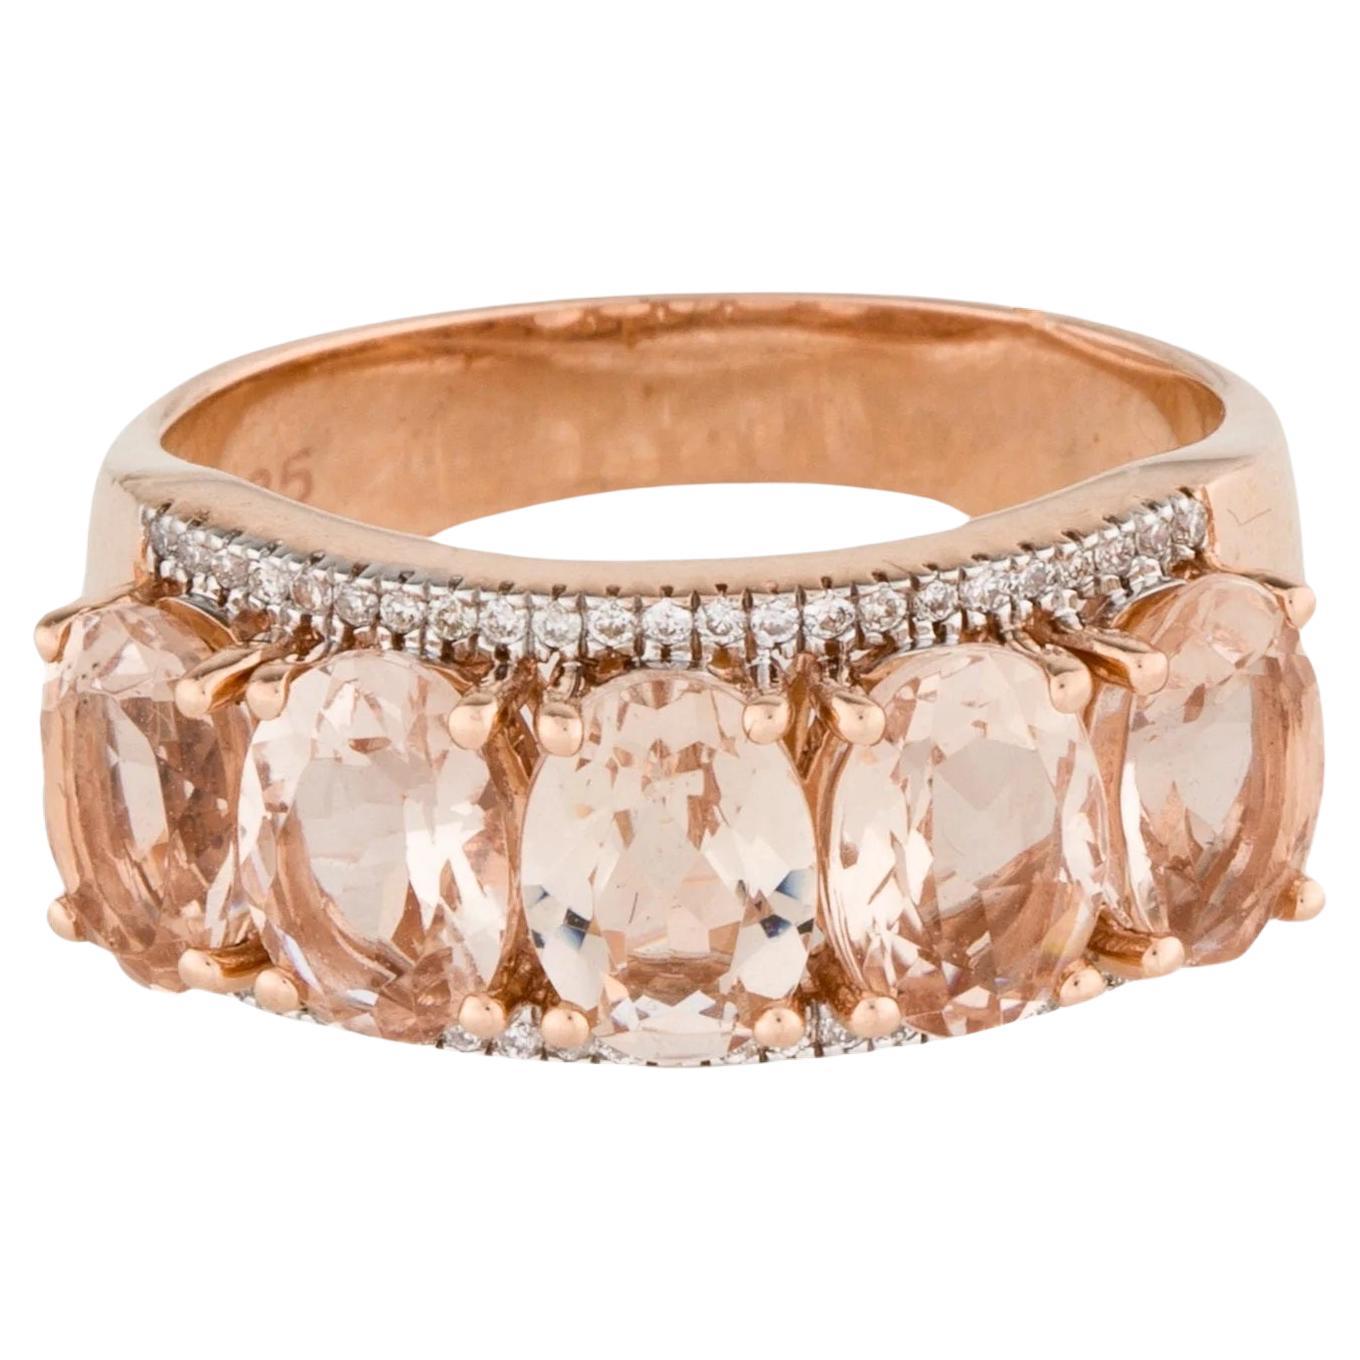 Elevate your jewelry collection with this exquisite 14K rose gold band, adorned with a mesmerizing 3.50 carat oval modified brilliant morganite. Crafted to perfection, this timeless piece showcases impeccable craftsmanship and undeniable